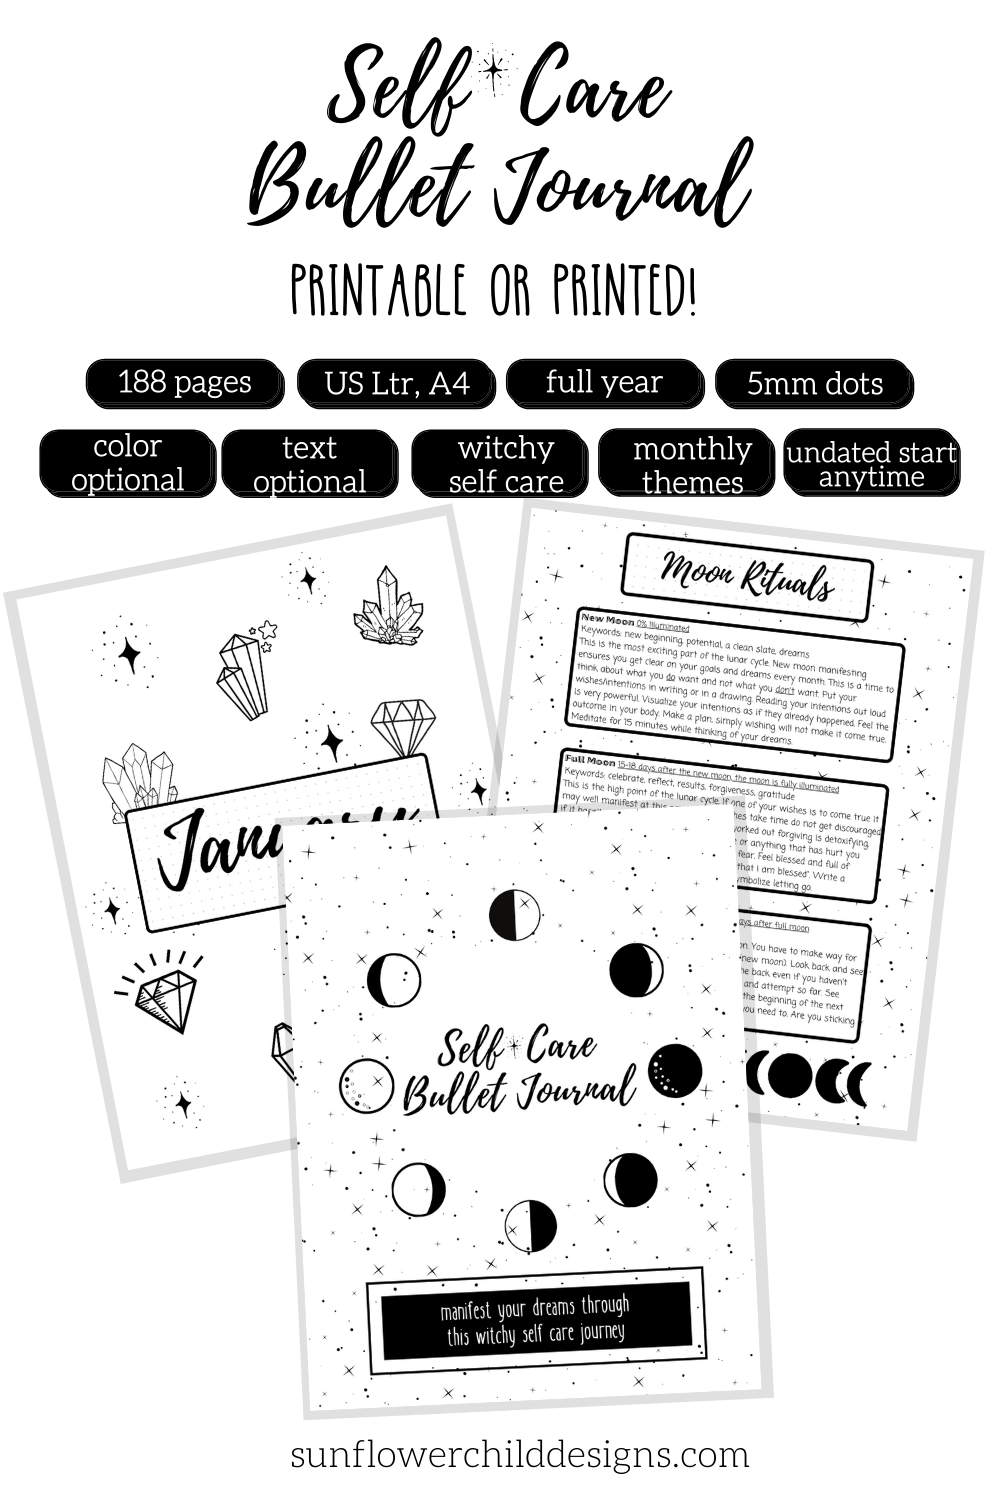 WITCHY SELF LOVE JOURNAL [ PRINTABLE ] – melancholymemento